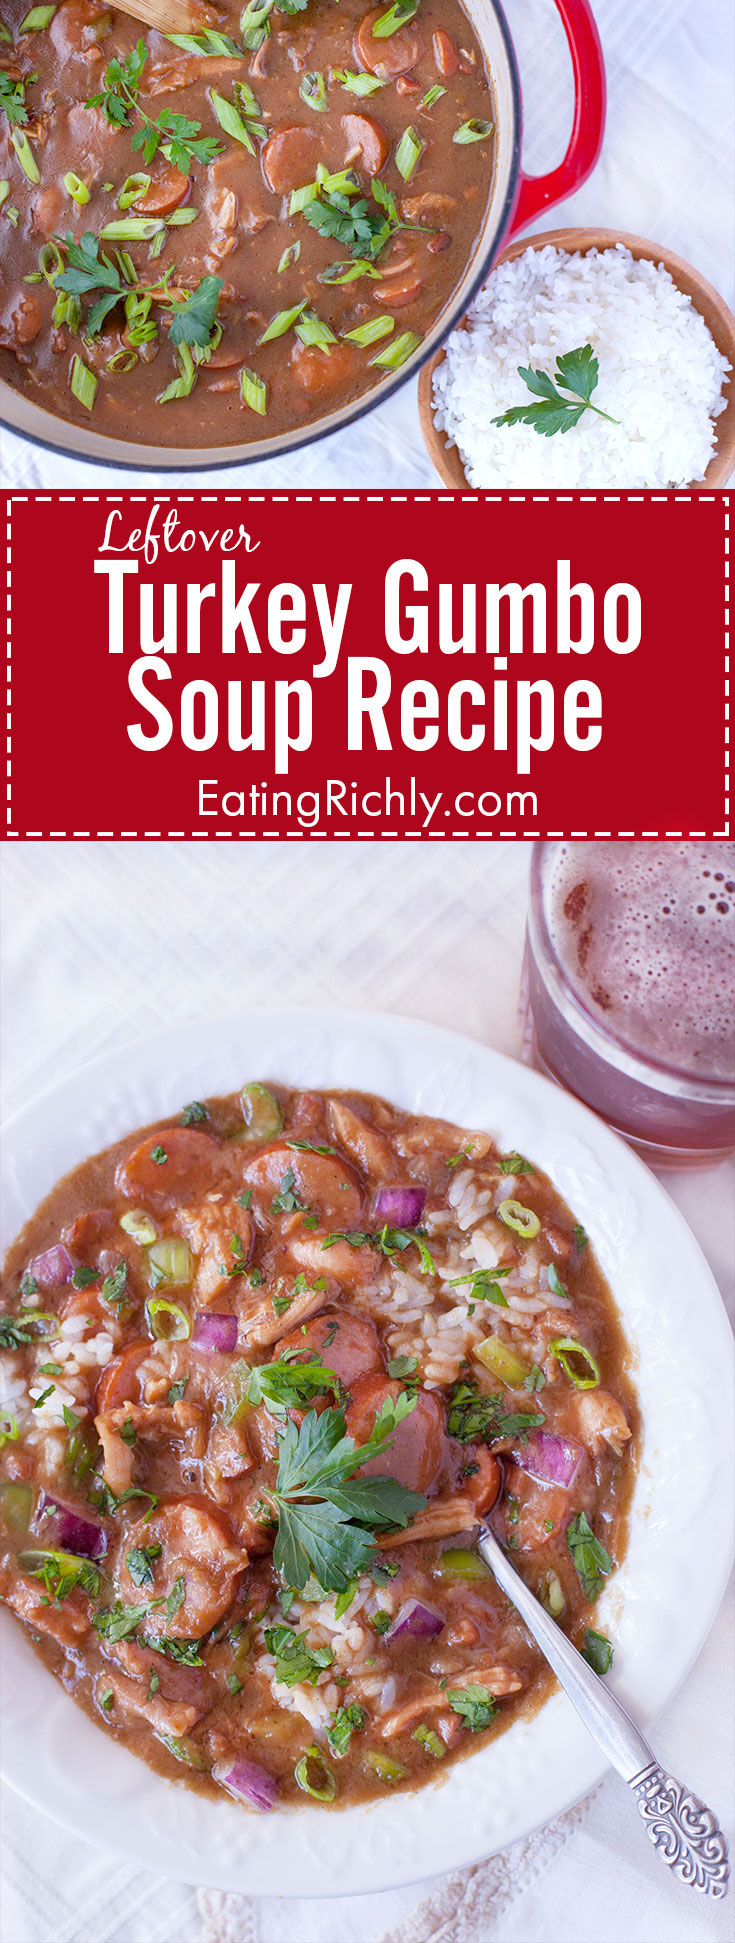 Need some good leftover turkey recipes? This turkey gumbo is a great way to use up leftover turkey during the holiday season, but you can also sub shredded chicken and chicken stock to make it any time of year. From EatingRichly.com